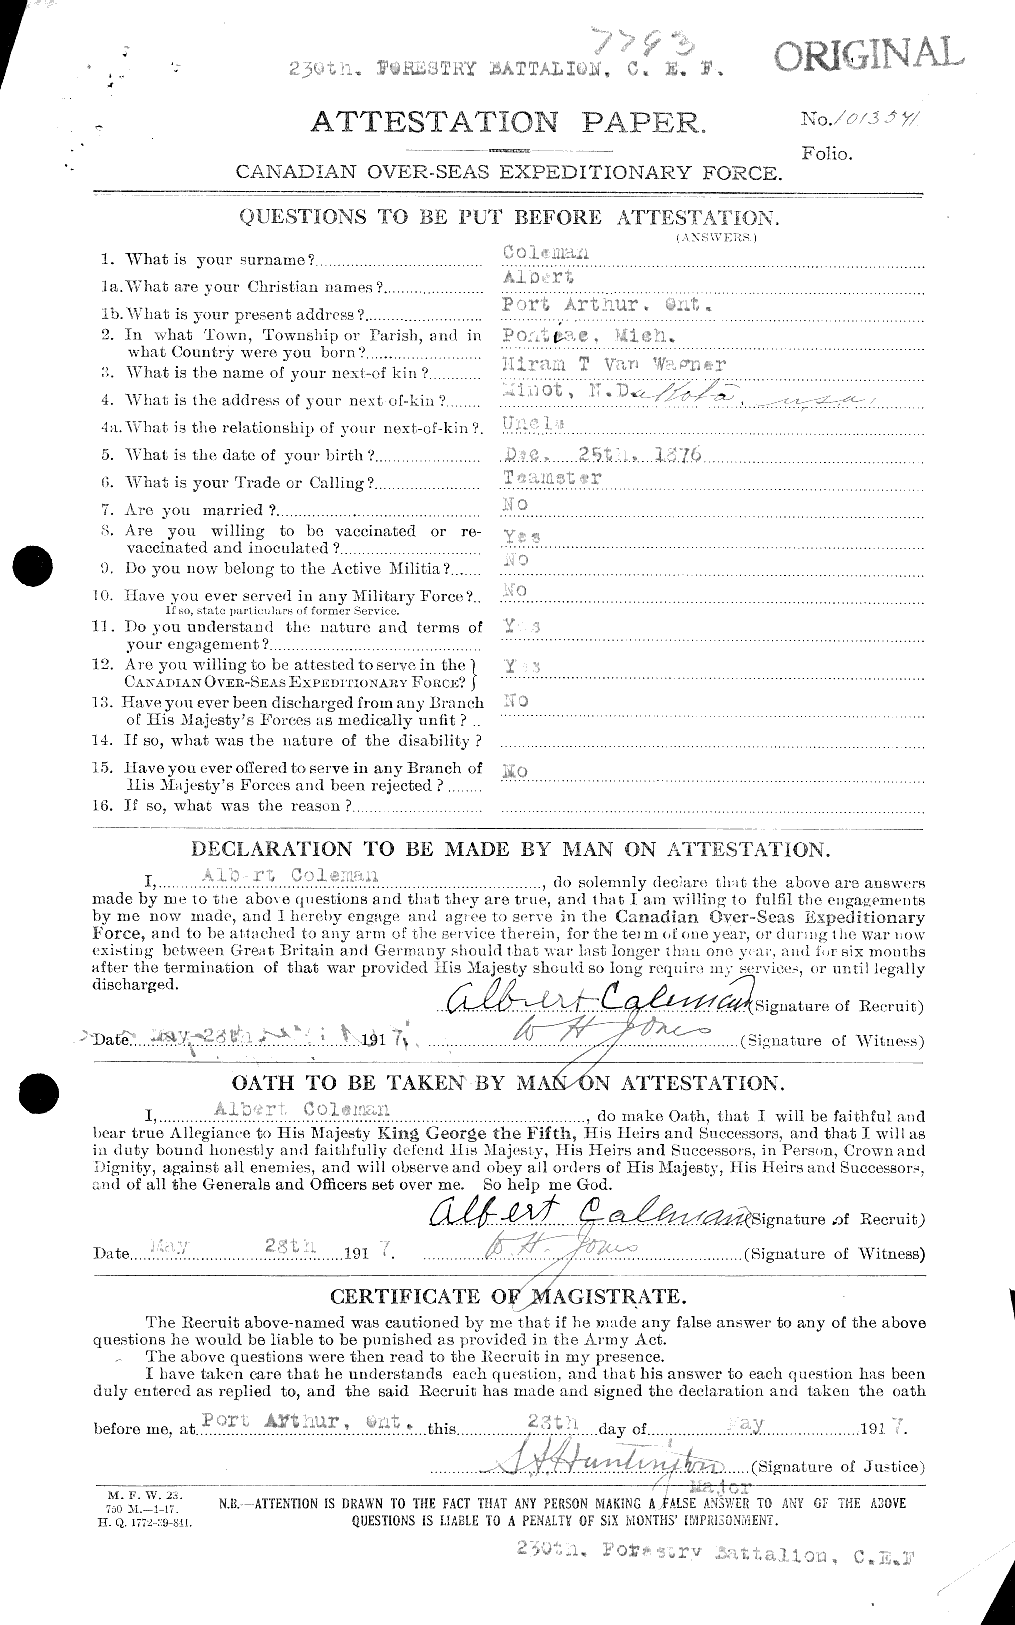 Personnel Records of the First World War - CEF 028044c